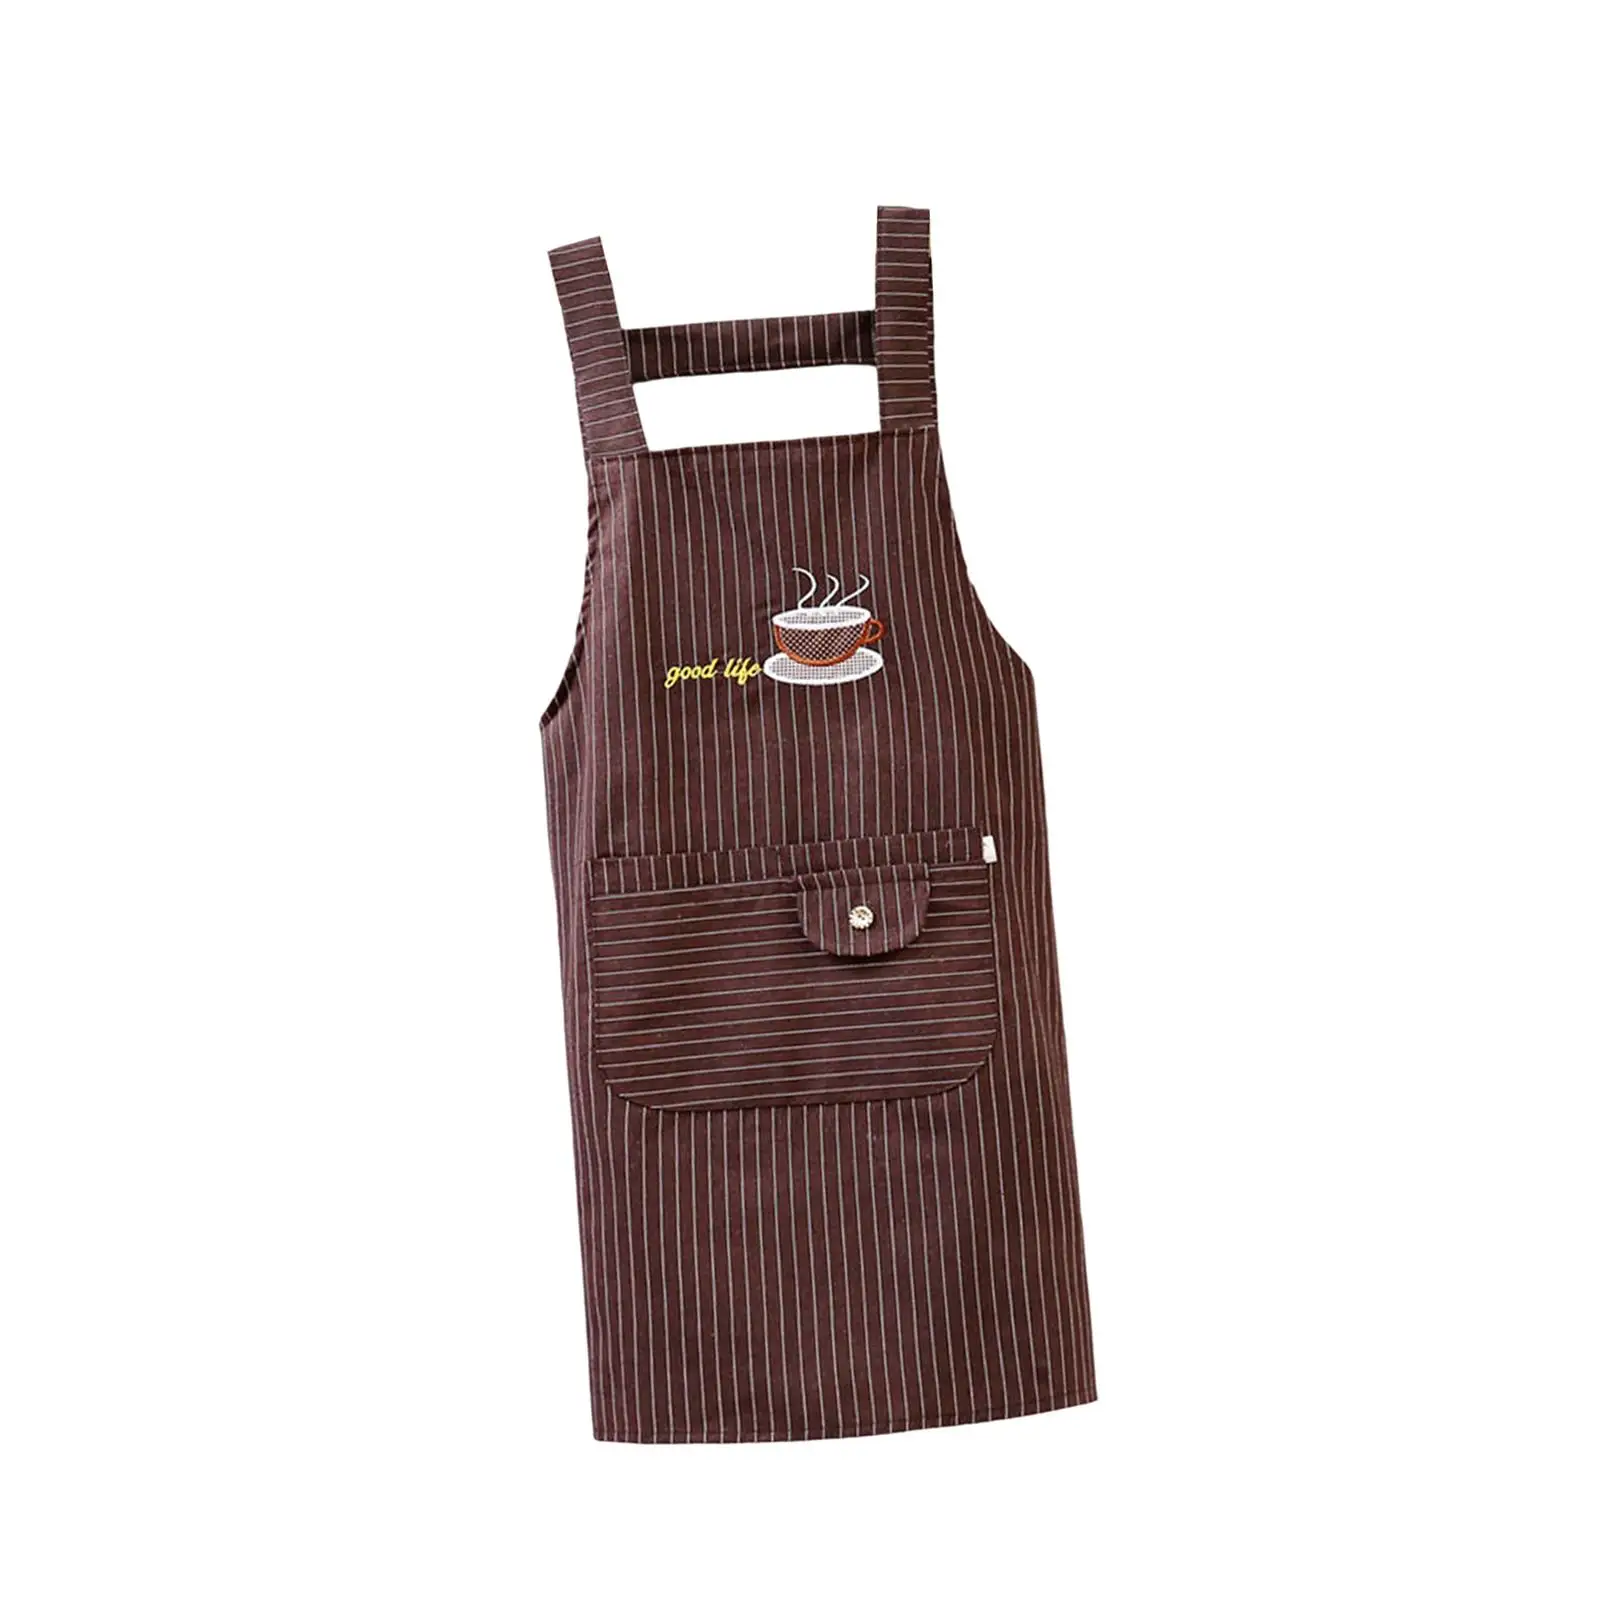 Kitchen Cooking Aprons Soft Professional with Pockets Oil Resistant Adjustable Kitchen Bib Chef Apron for Men Women Unisex Chef